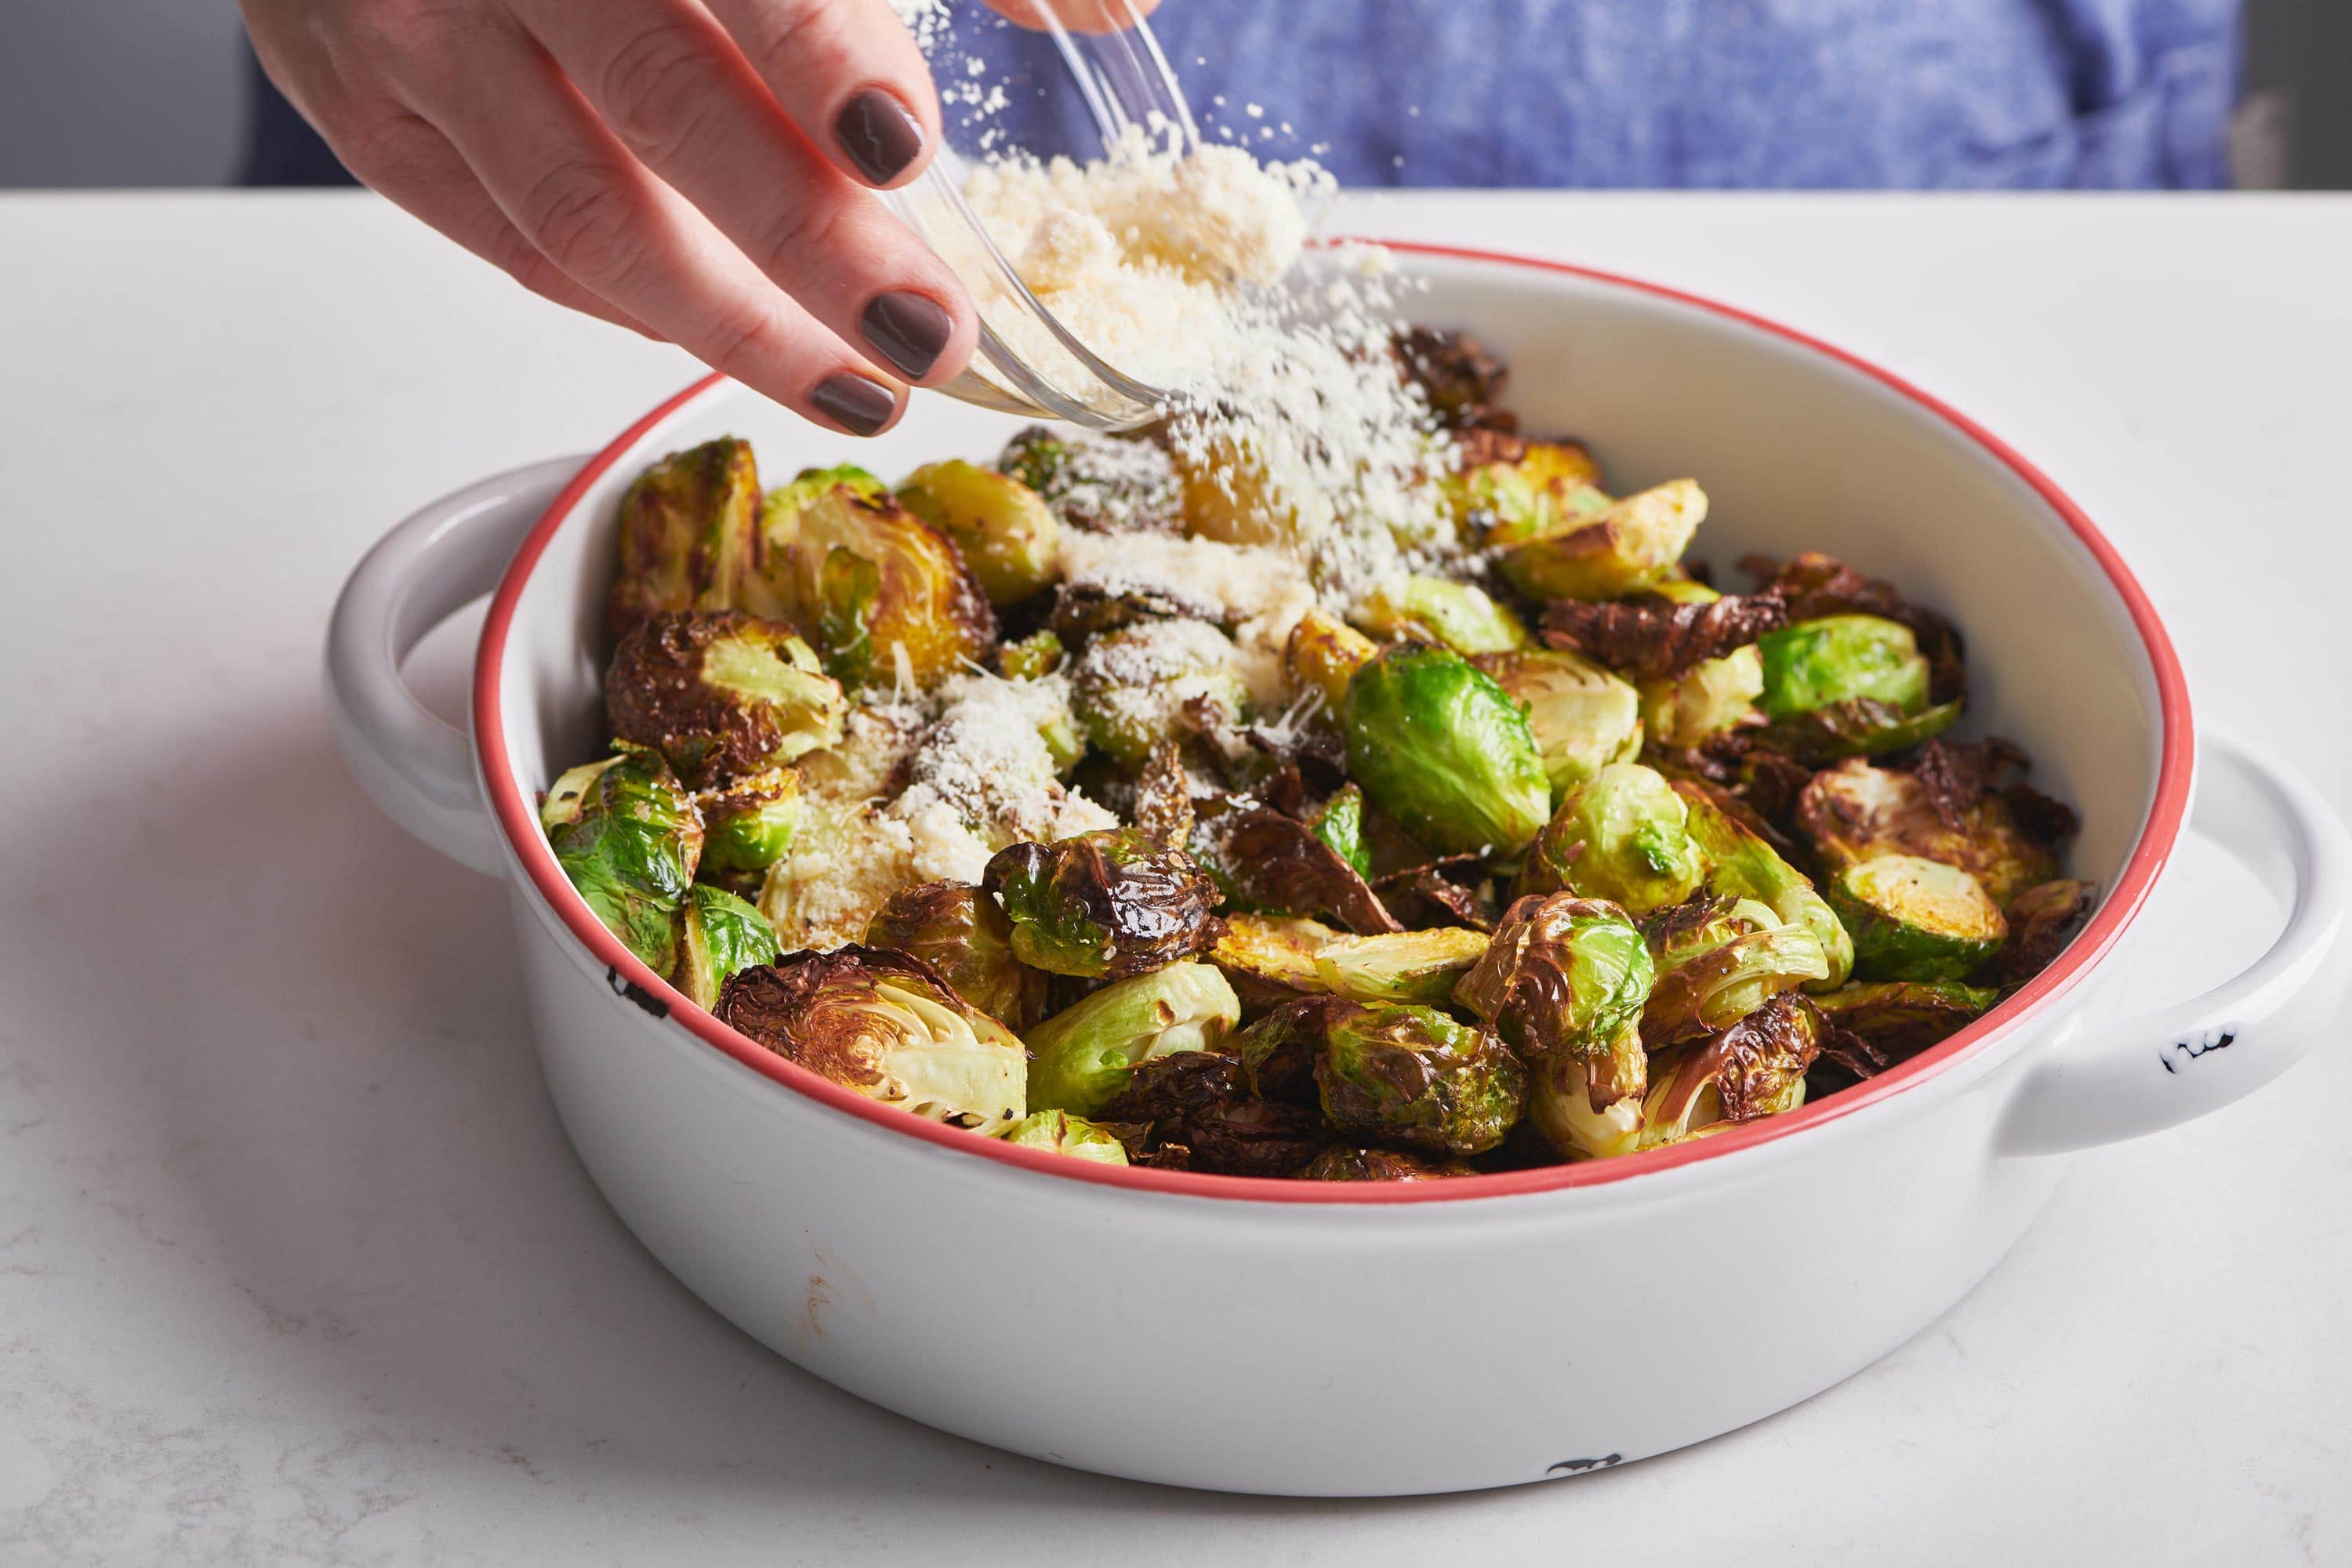 Woman adding grated Parmesan to bowl of air-fried Brussels sprouts.